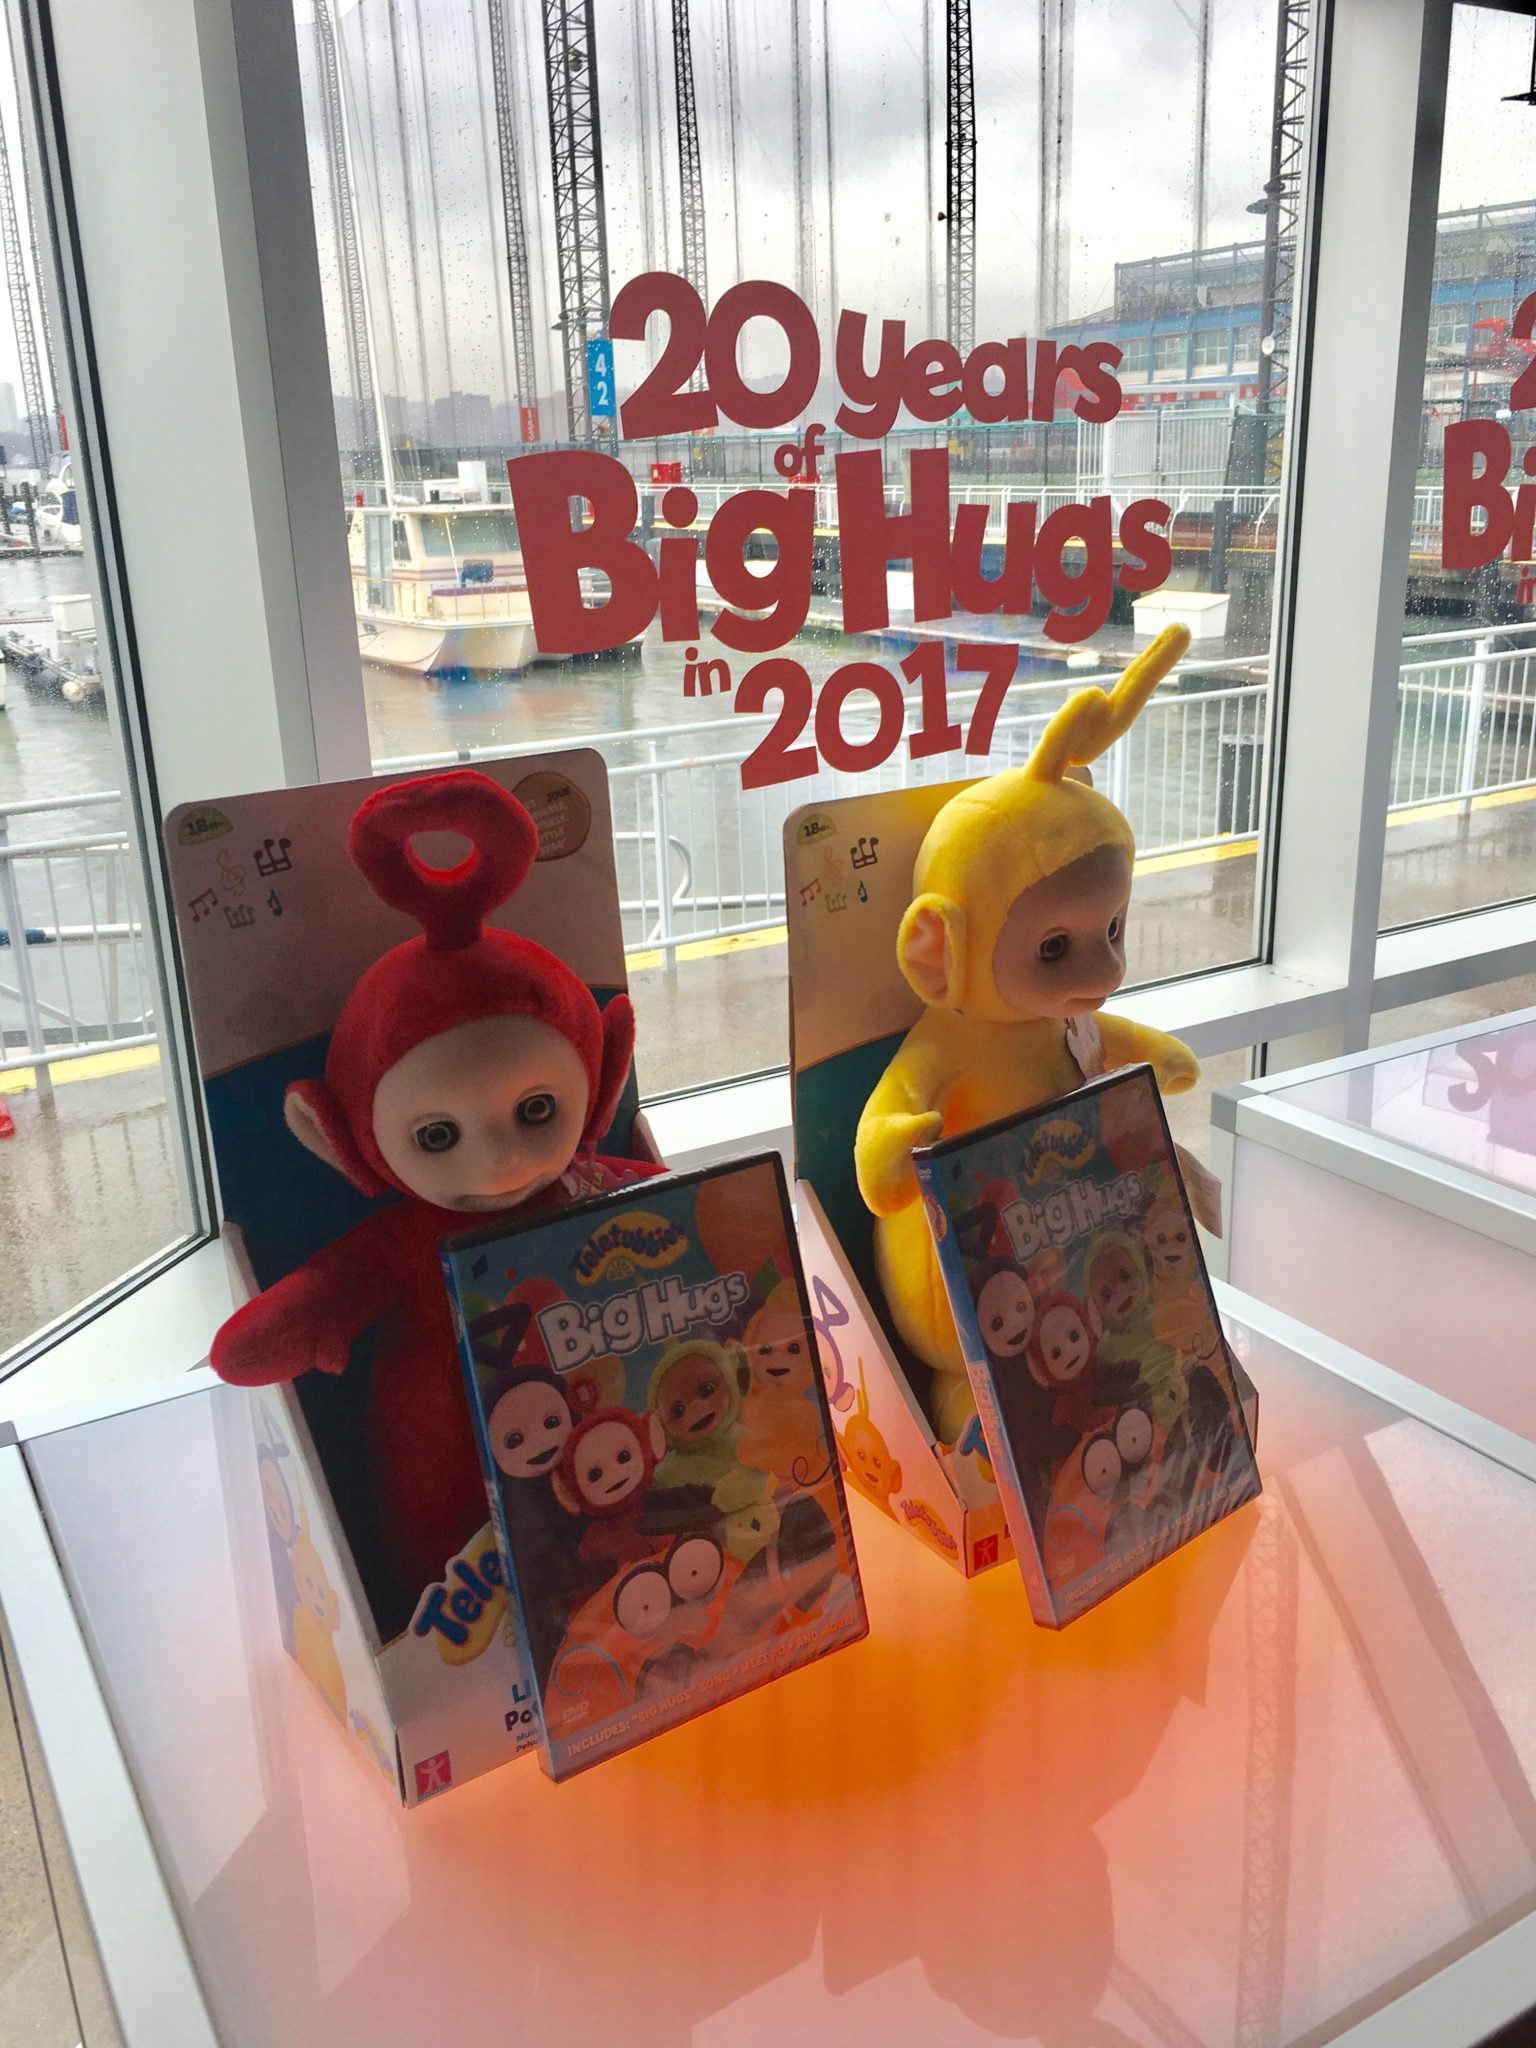 Teletubbies returned to NYC to celebrate their 2oth Anniversary! Can you believe these huggable Tubbies have been around for 20 years? See how we celebrated